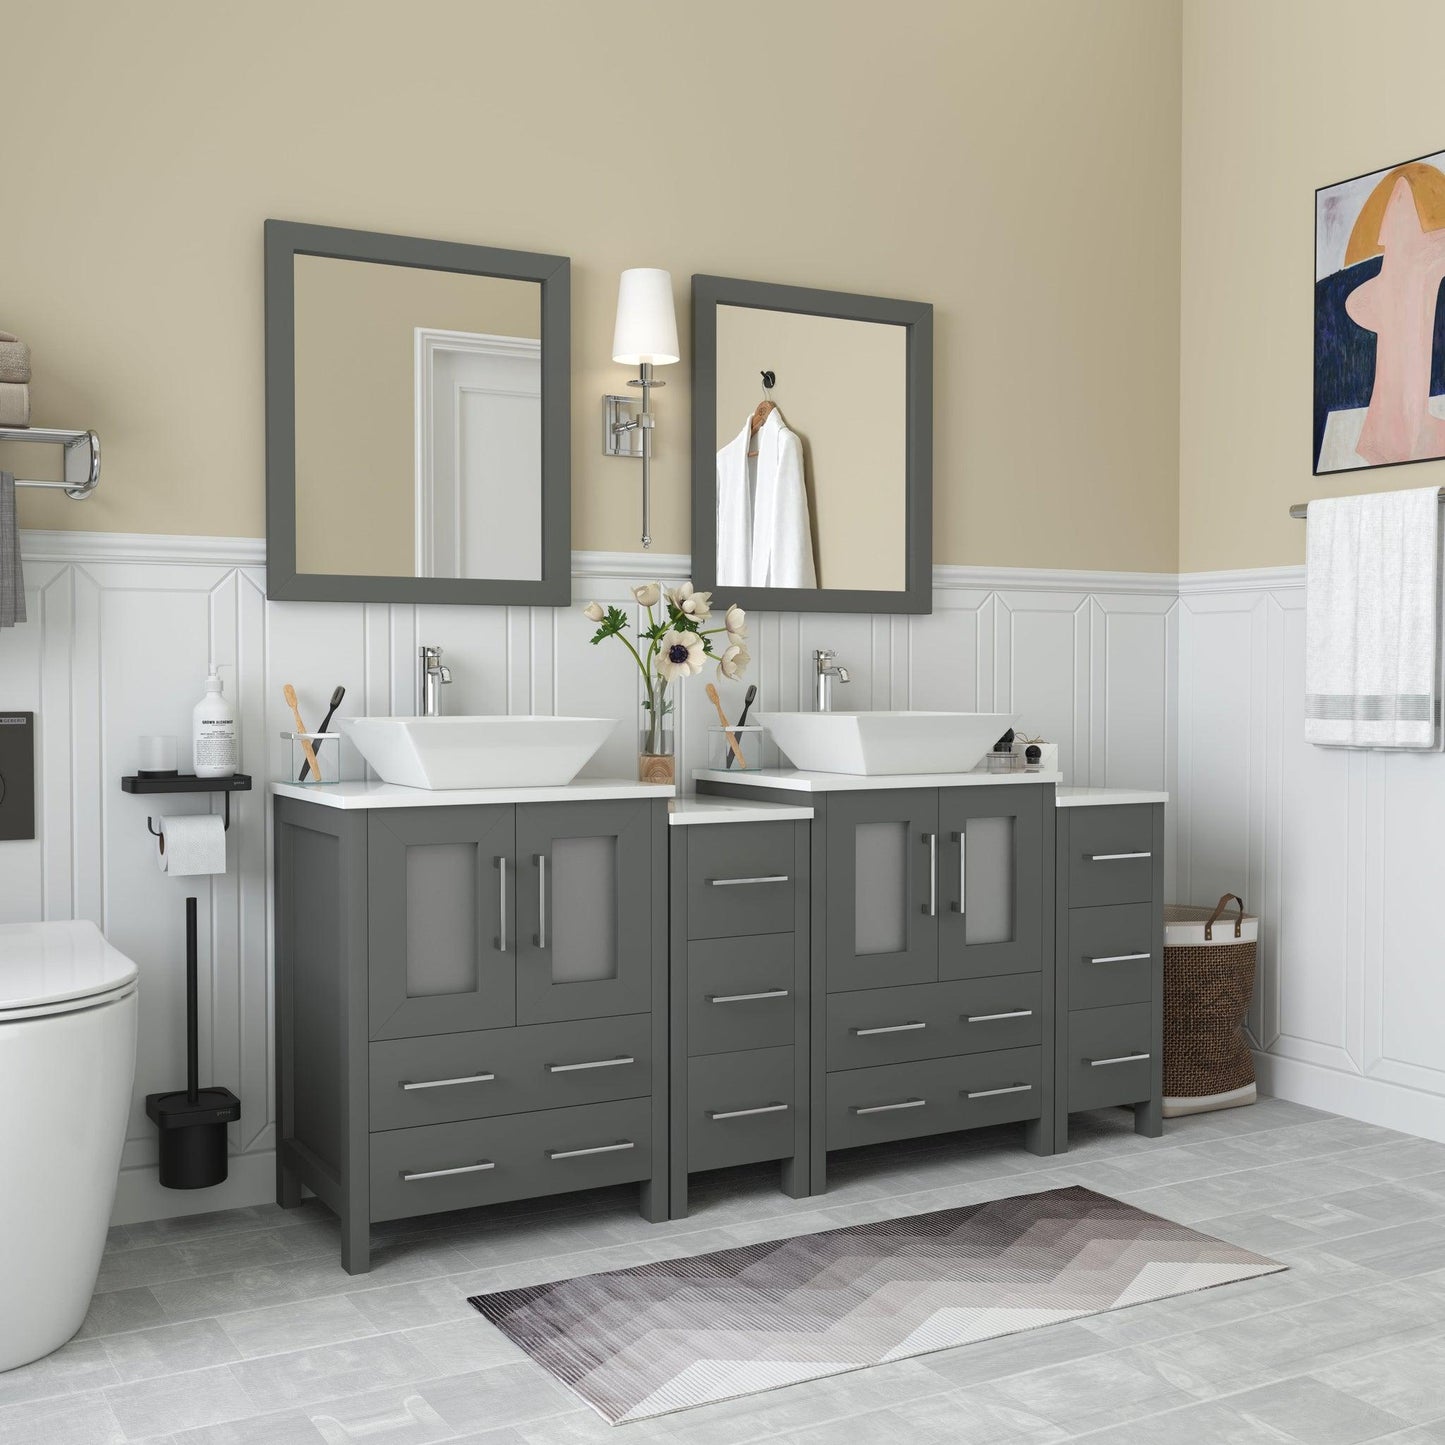 Vanity Art Ravenna 72" Double Gray Freestanding Vanity Set With White Engineered Marble Top, 2 Ceramic Vessel Sinks, 2 Side Cabinets and 2 Mirrors